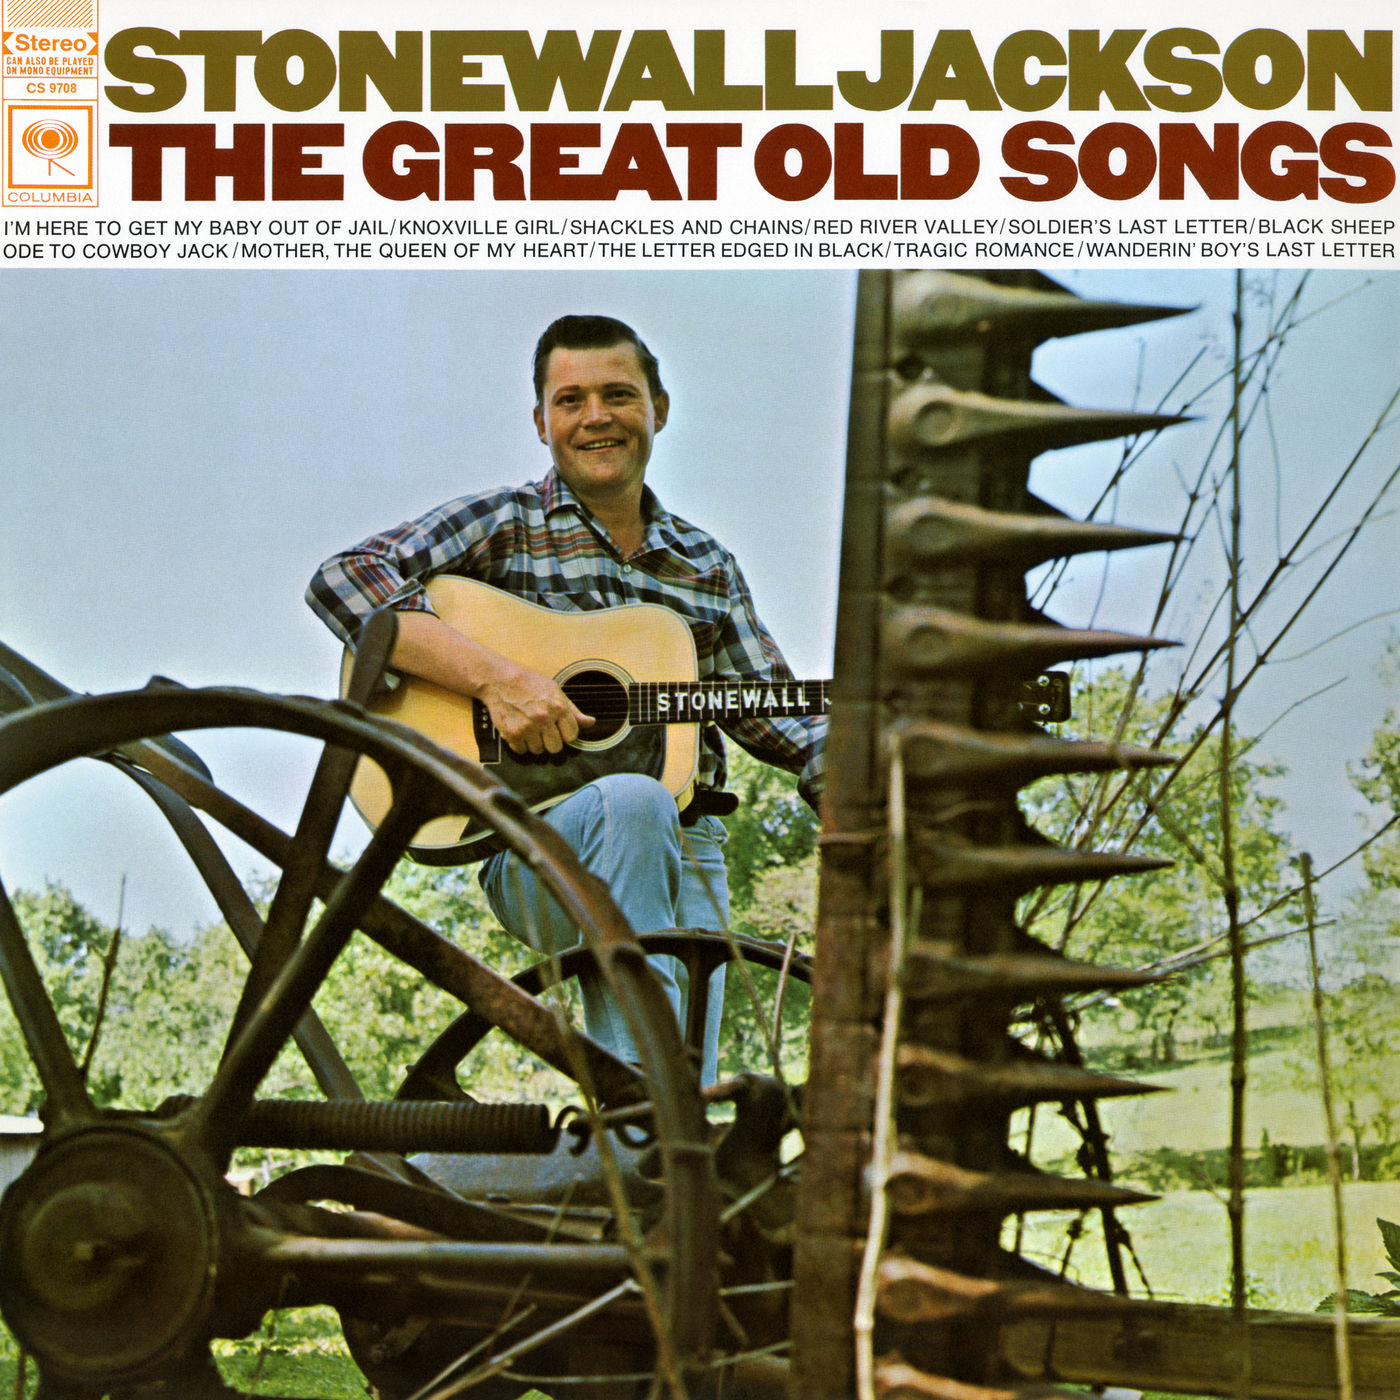 Stonewall Jackson – The Great Old Songs